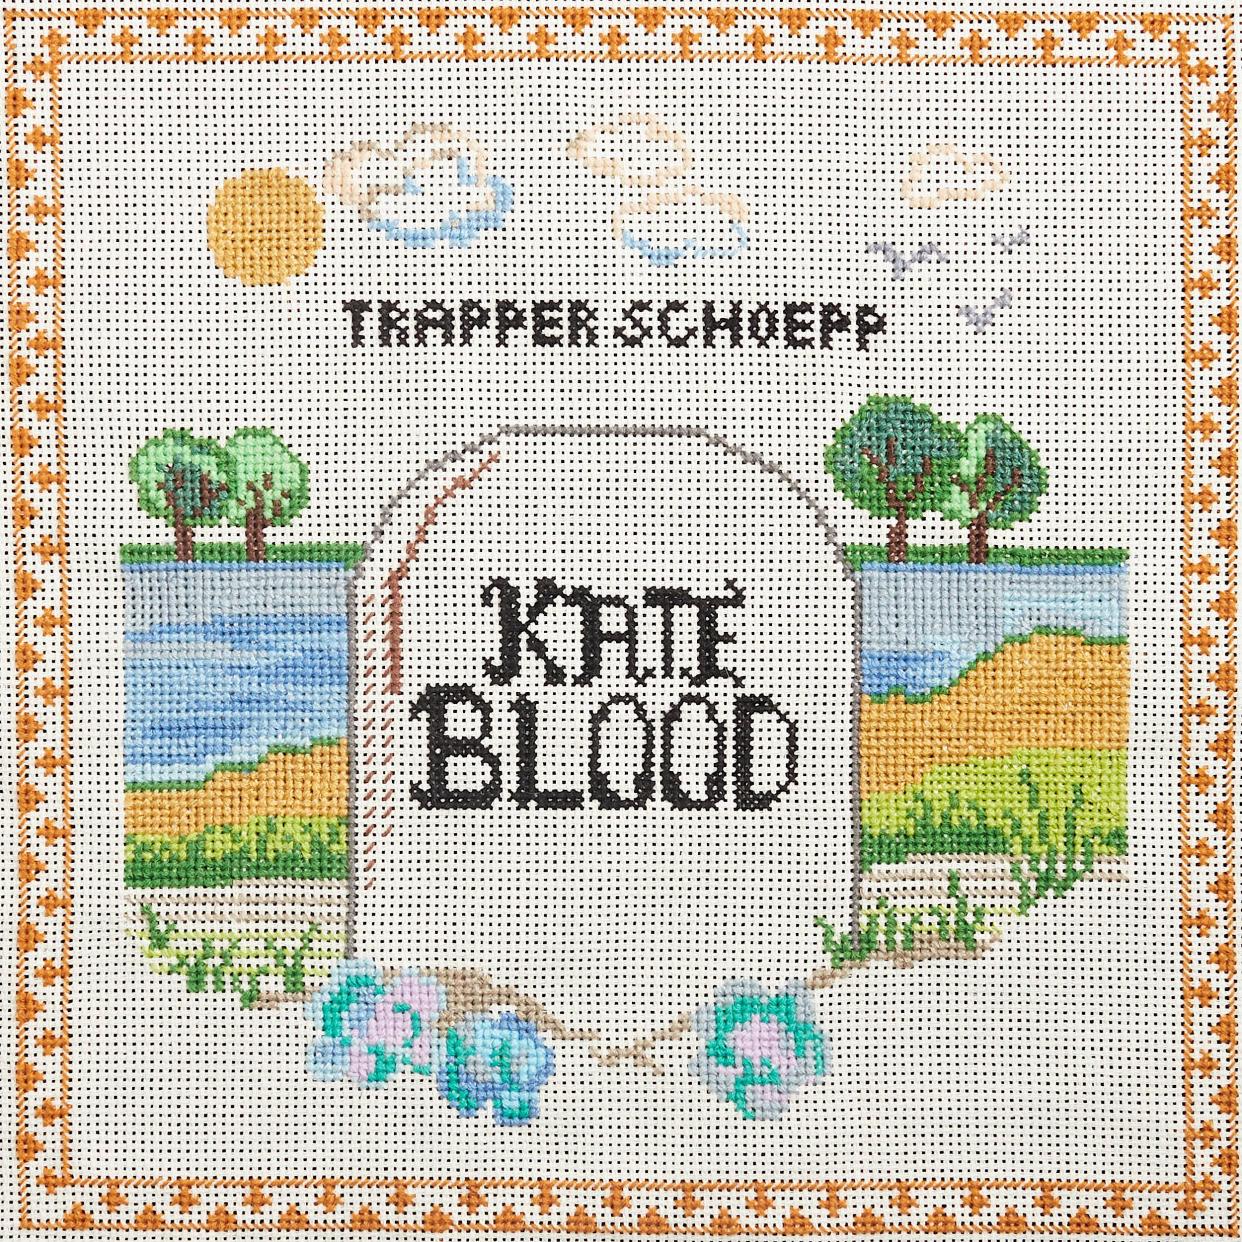 Milwaukee-based musician Trapper Schoepp released a song Feb. 13 titled "Kate Blood," inspired by urban legends surrounding the young woman buried at Riverside Cemetery in Appleton.